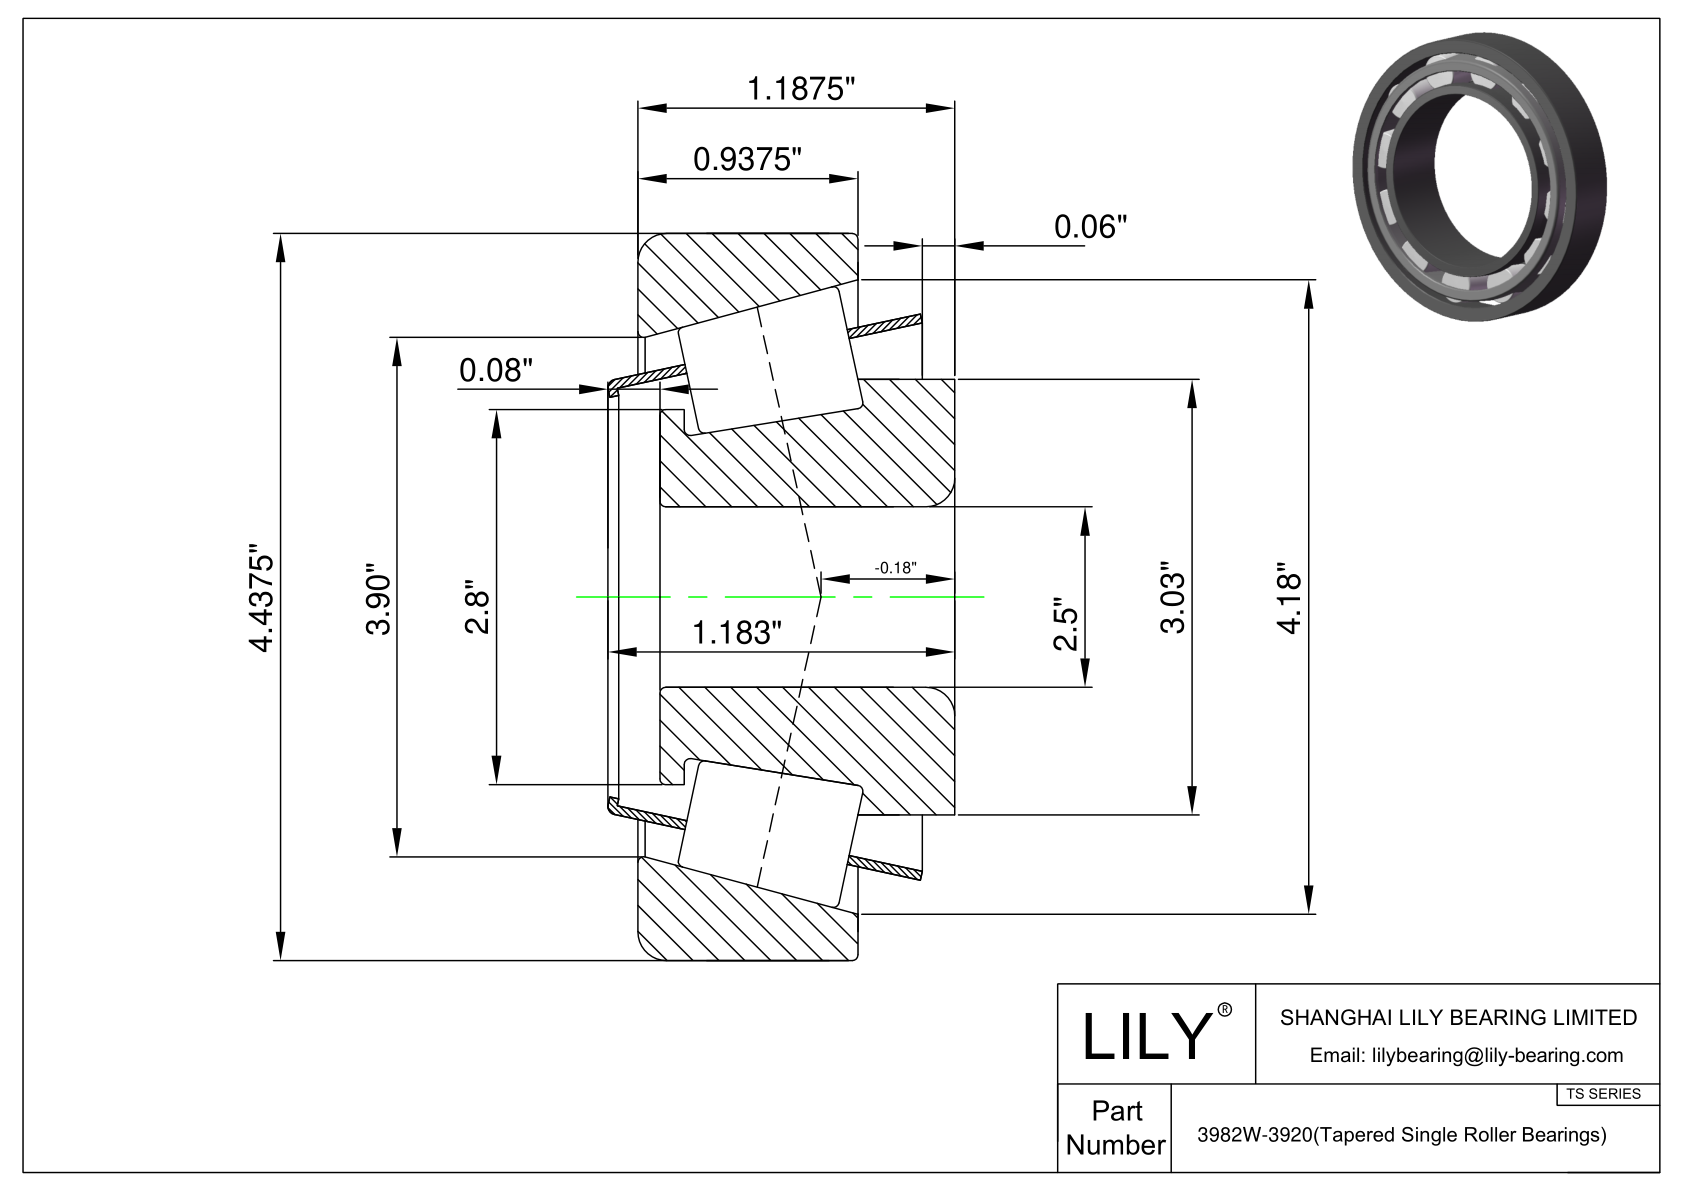 3982W-3920 TS (Tapered Single Roller Bearings) (Imperial) cad drawing